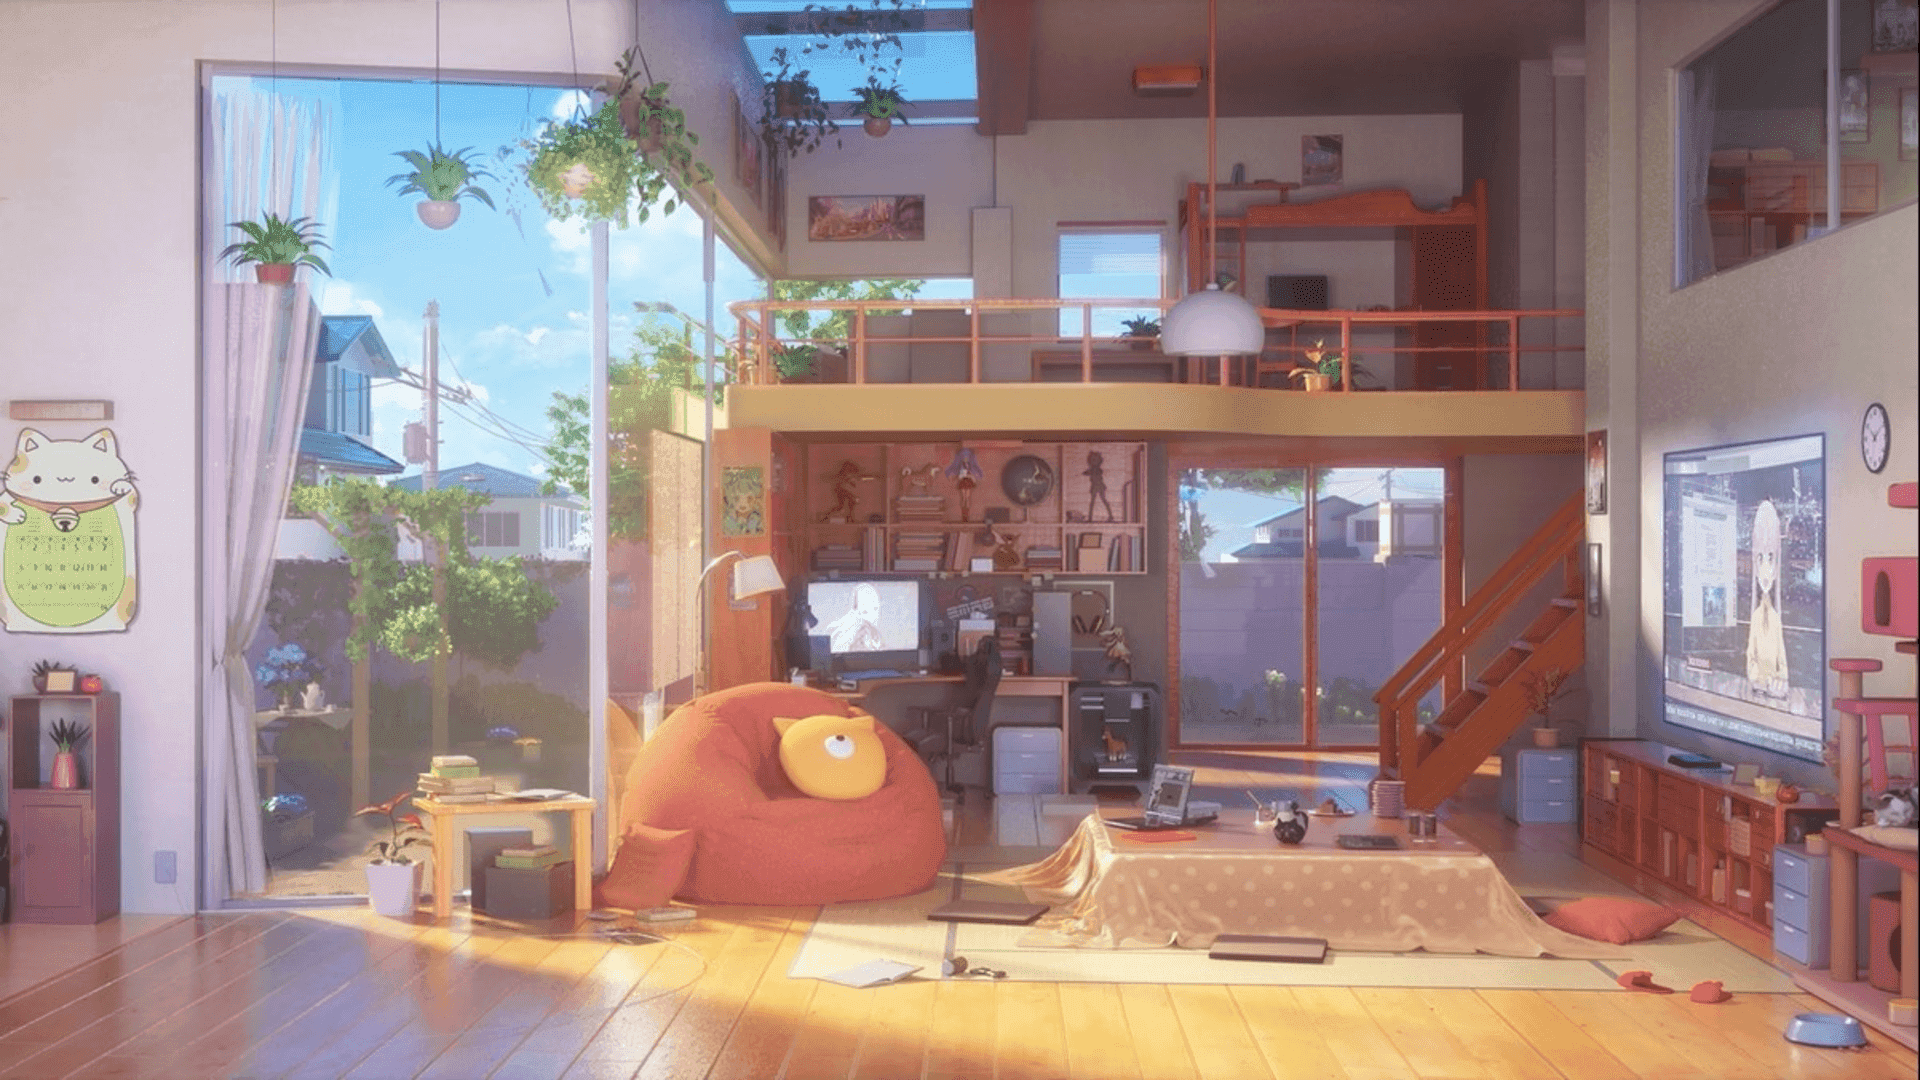 Download Unwind and Relax in this Cozy Anime Room  Wallpaperscom